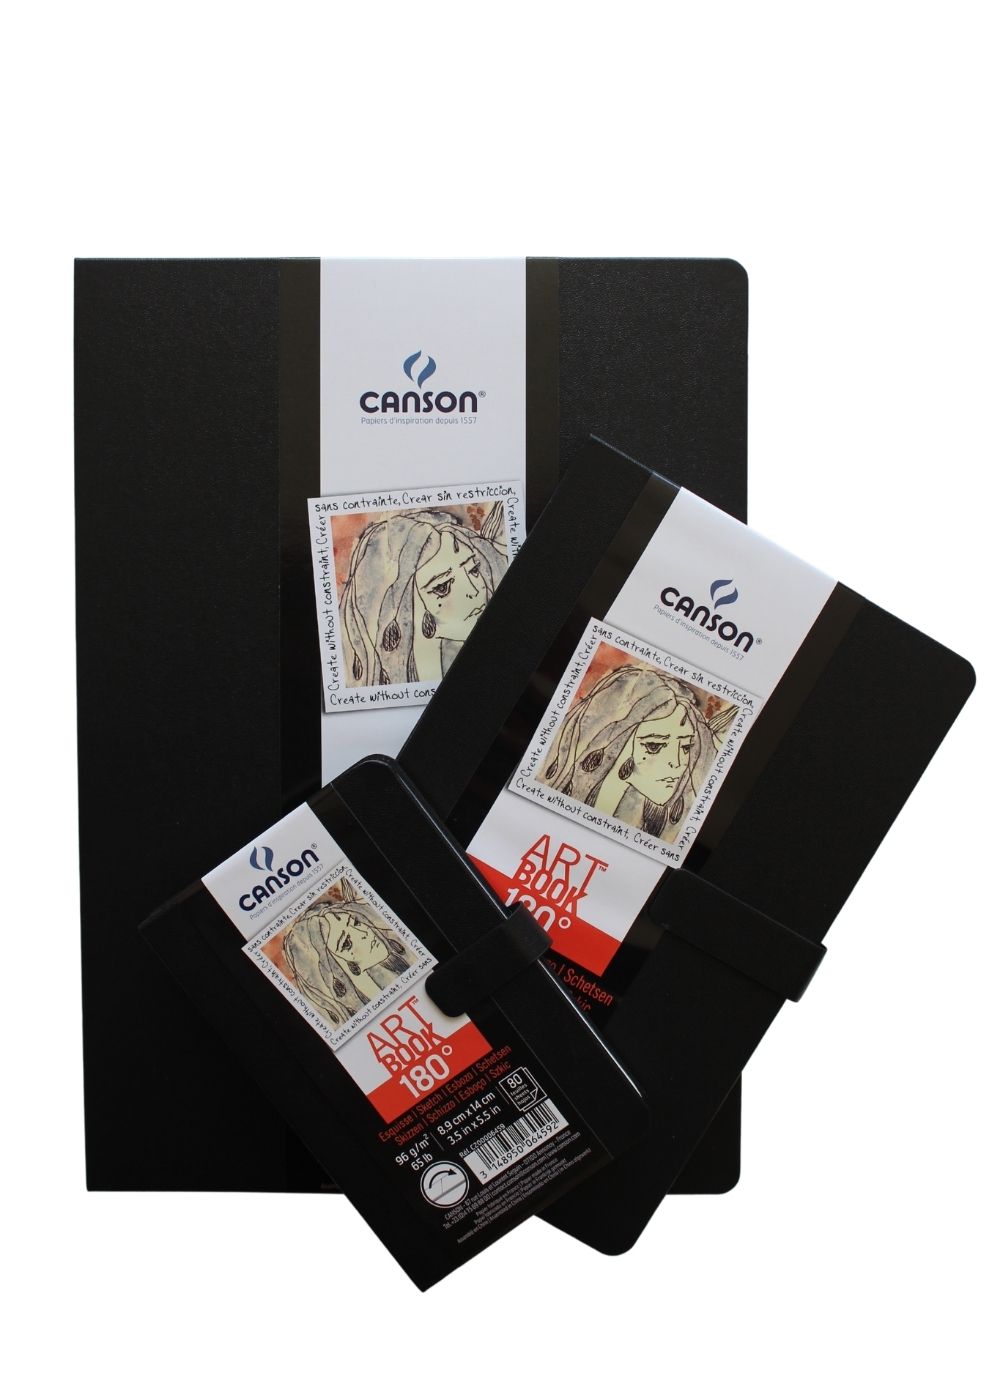 Canson Art book 180° - Liberties Papers